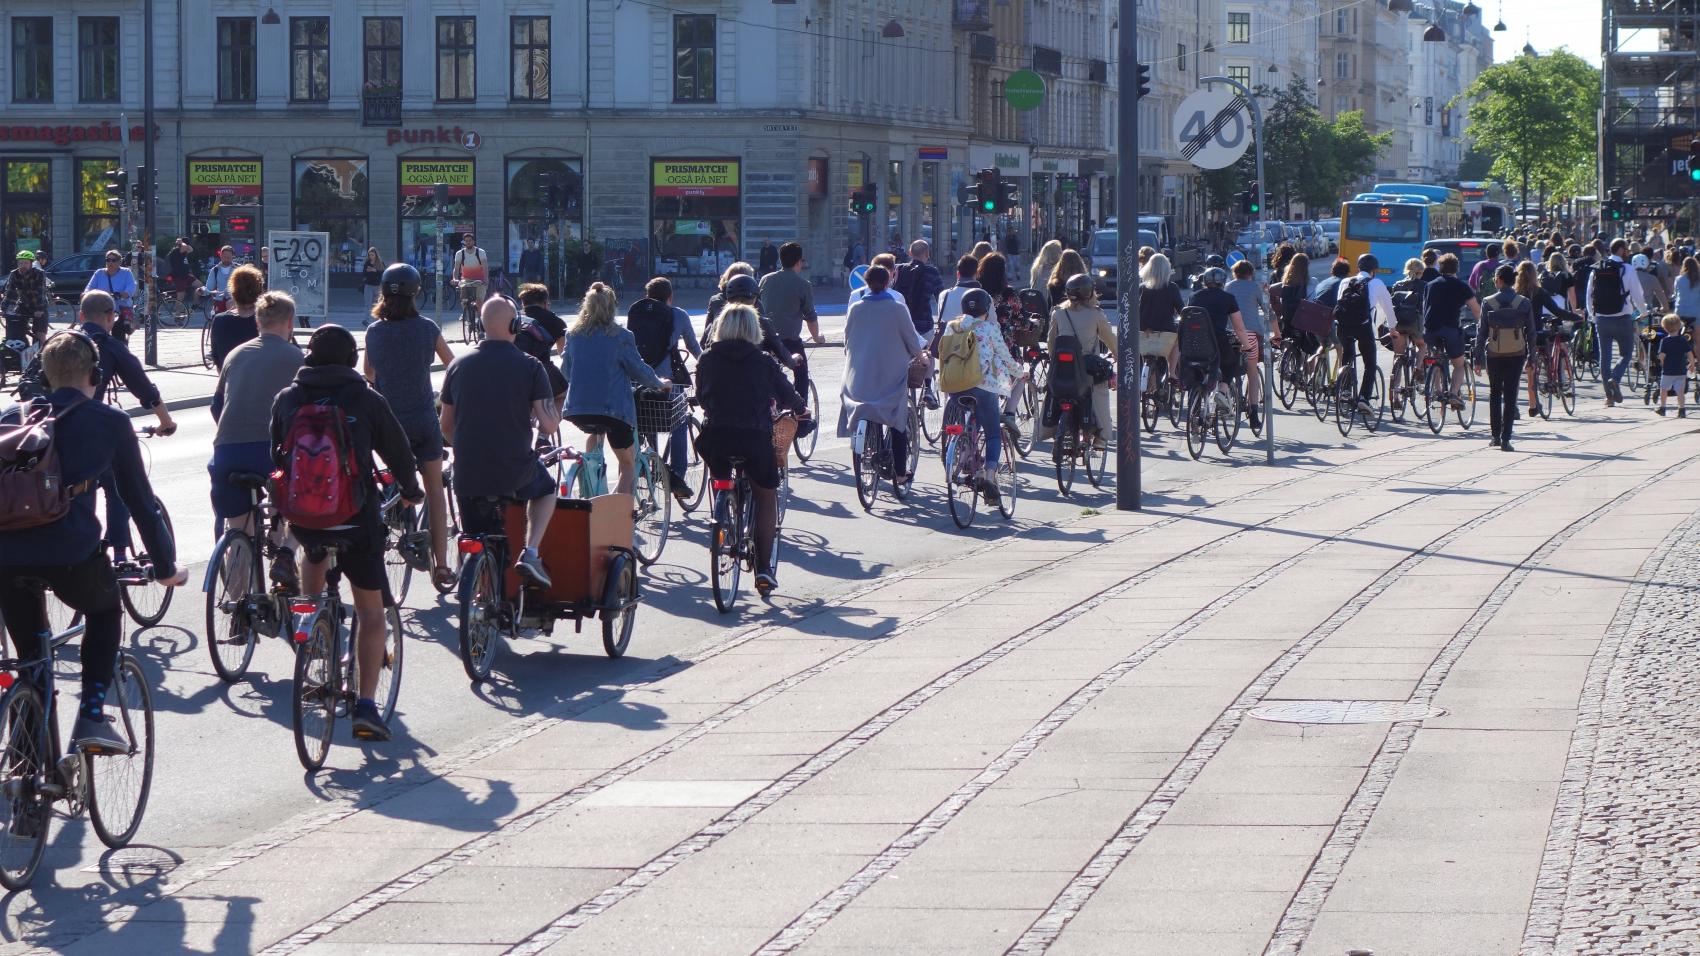 The impressive “bicycle traffic jams” that one can observe on Dronning Louises Bro form partially because the crossing after the bridge is not included in the green wave coordination.